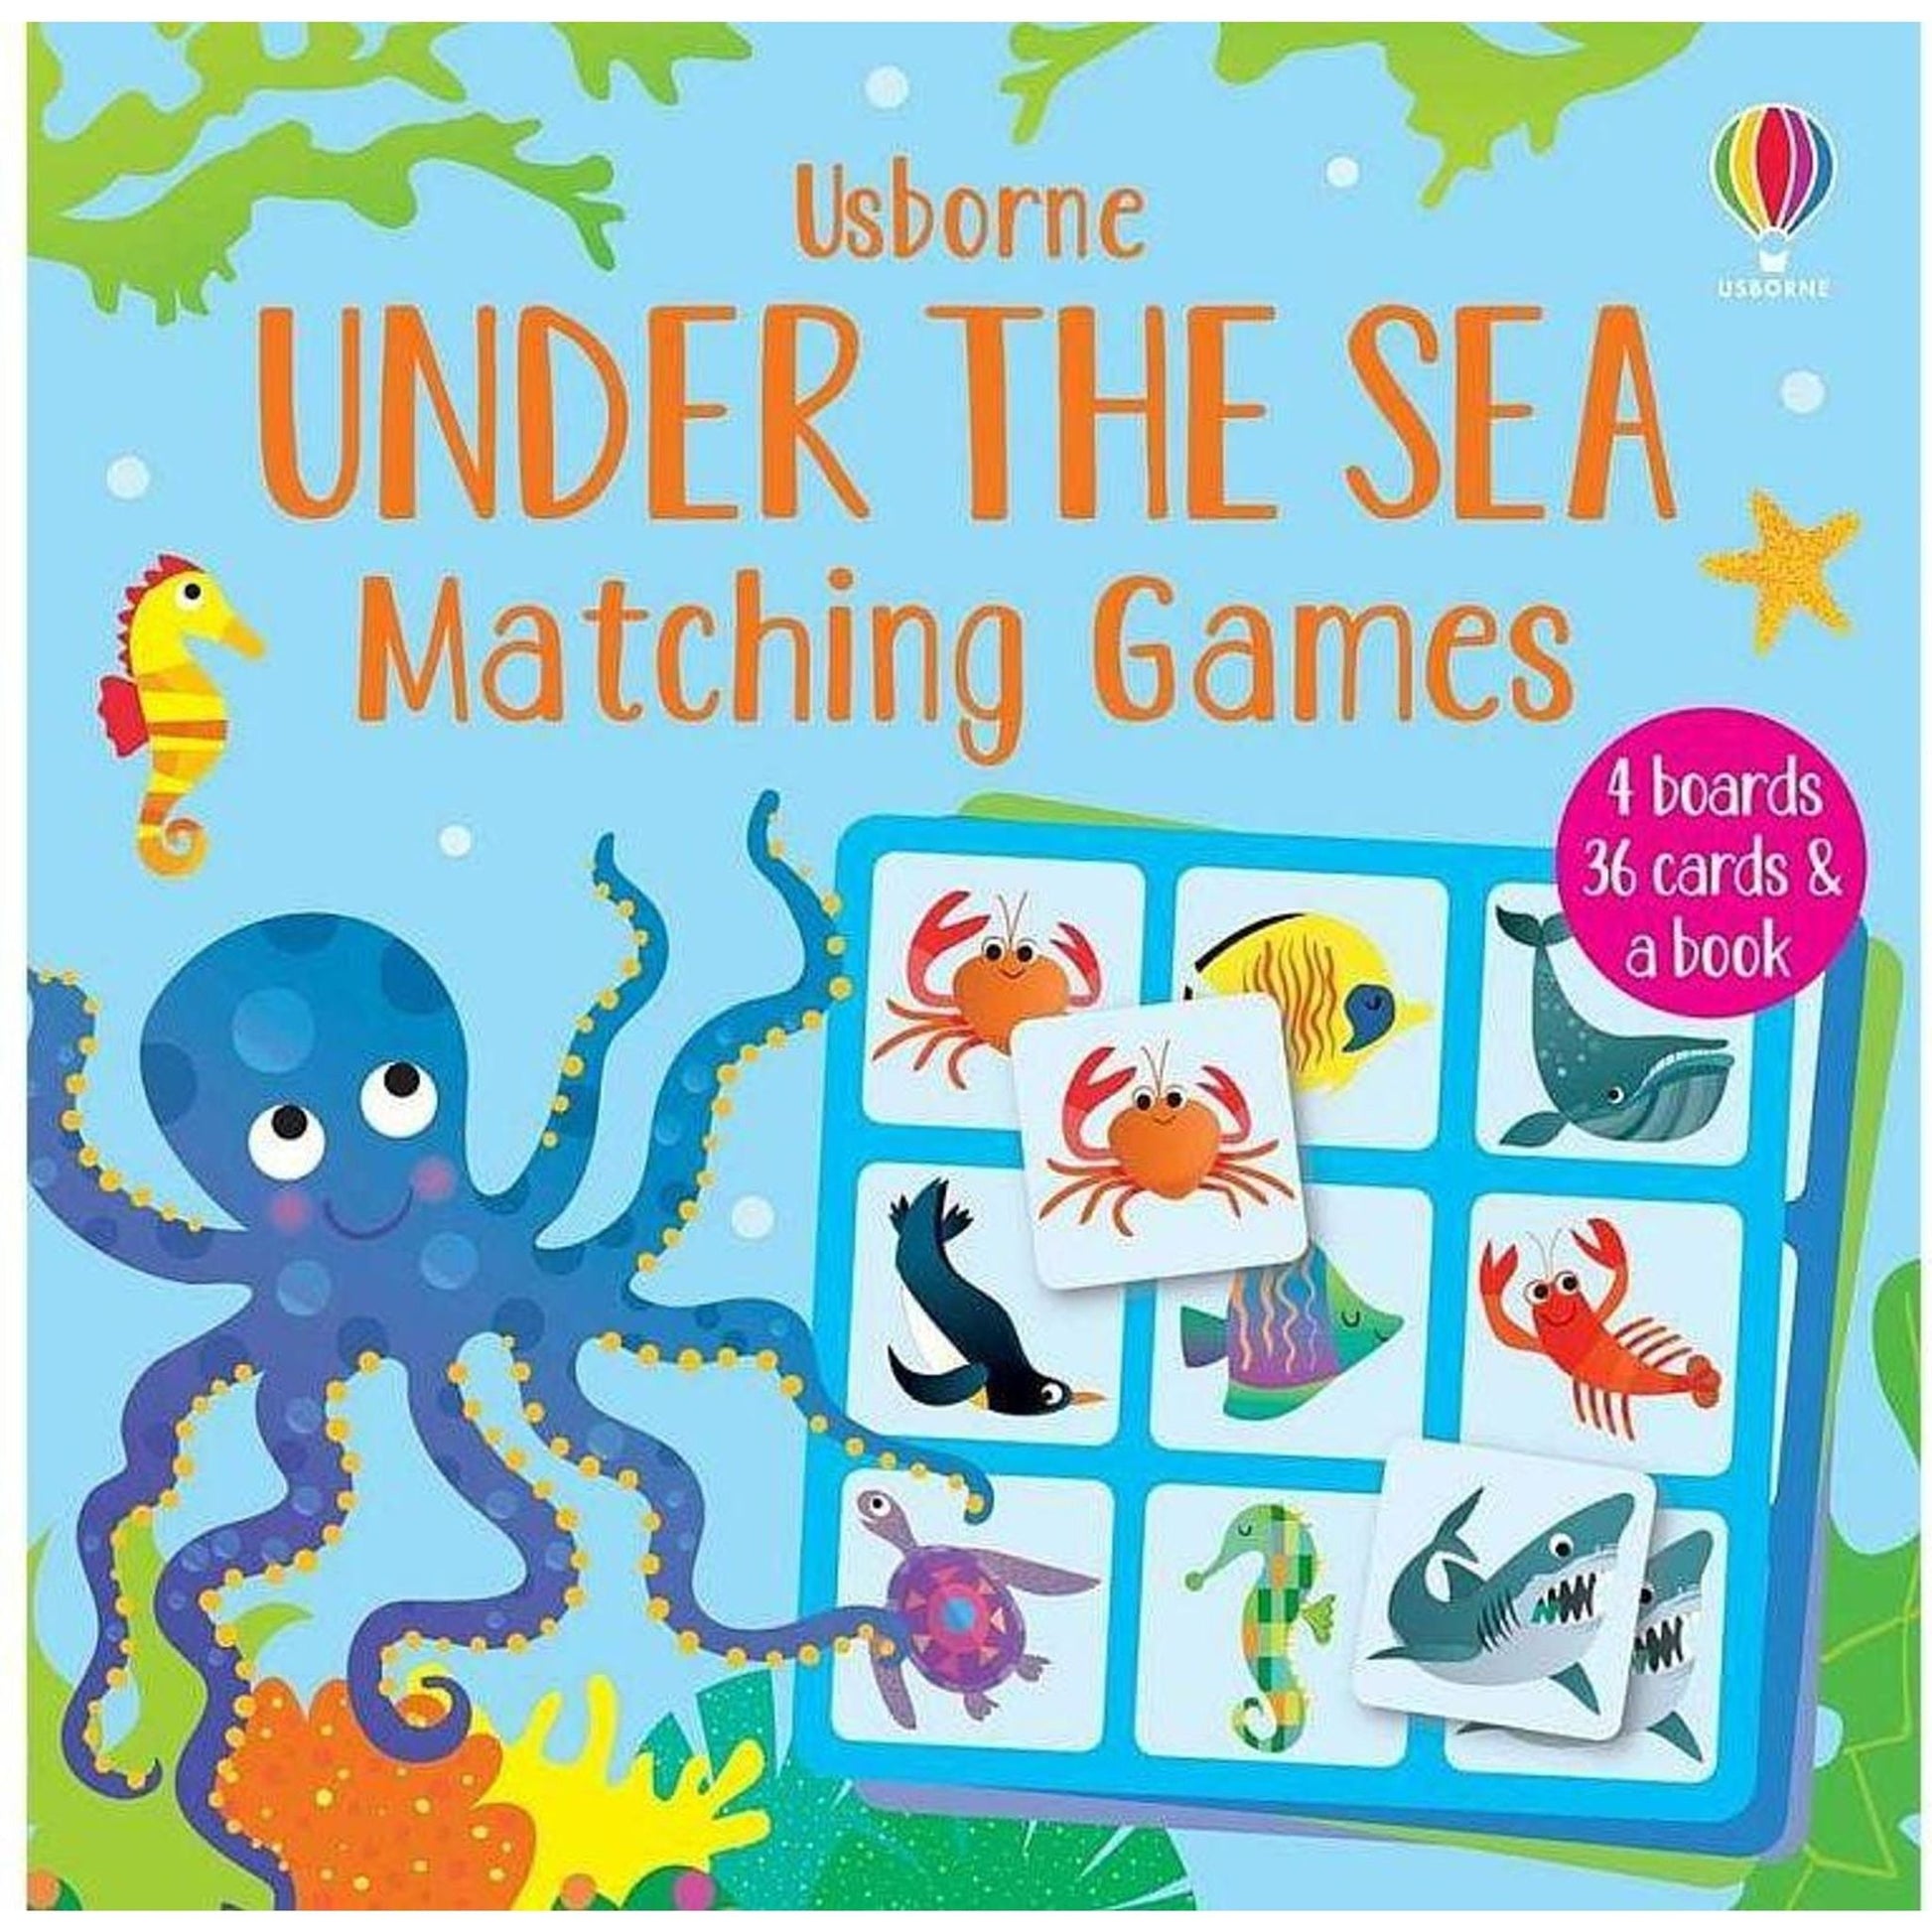 Usborne Under the Sea Matching Game - Toybox Tales